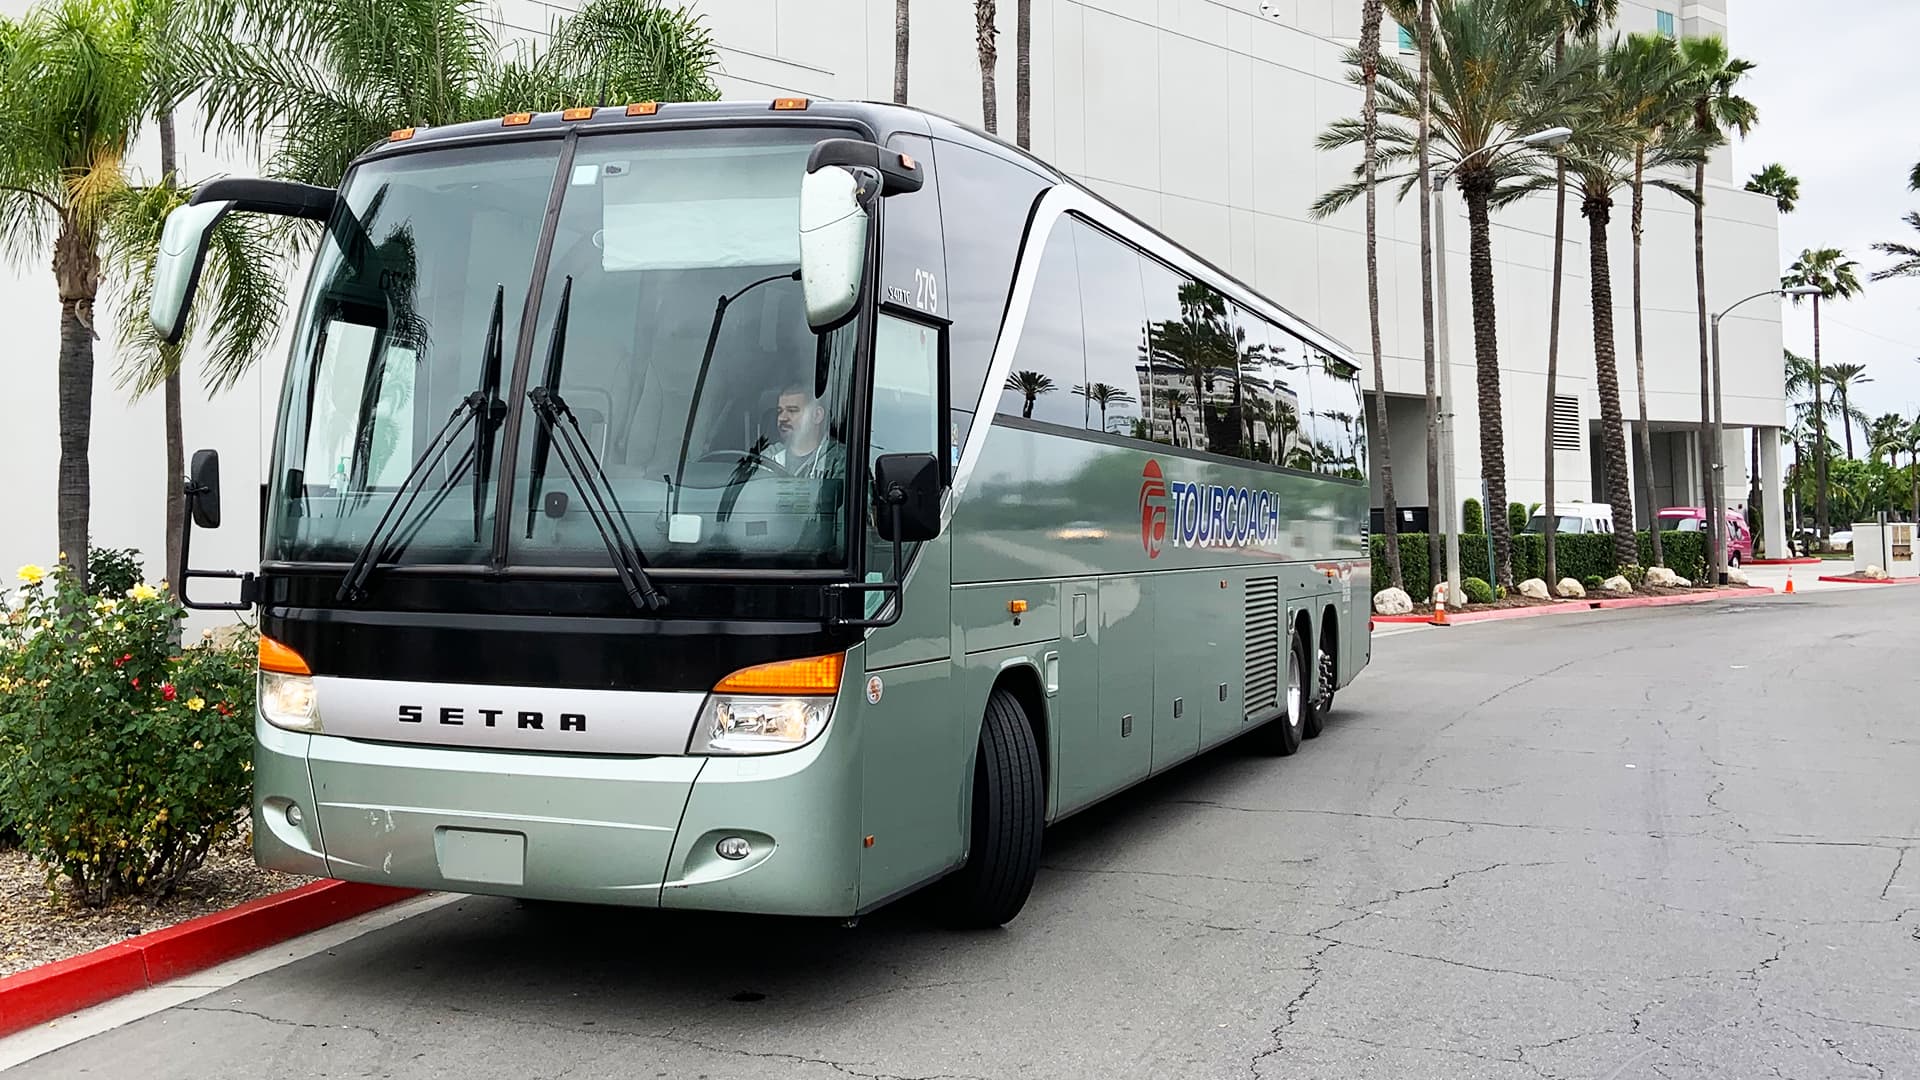 TourCoach Bus driving down street lined with palm trees